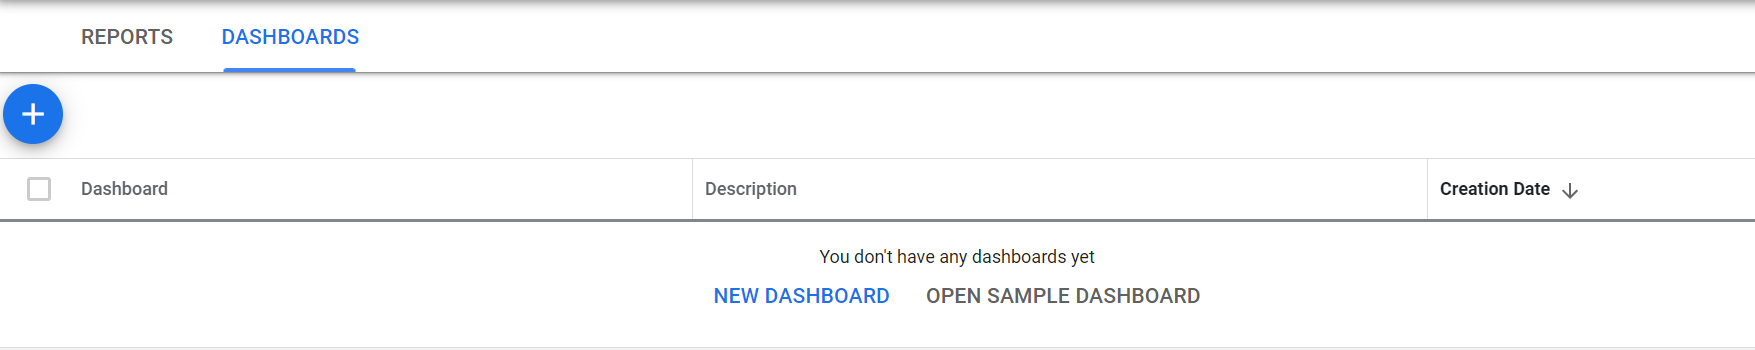 Home page for CM-level dashboards created in Google Ads.